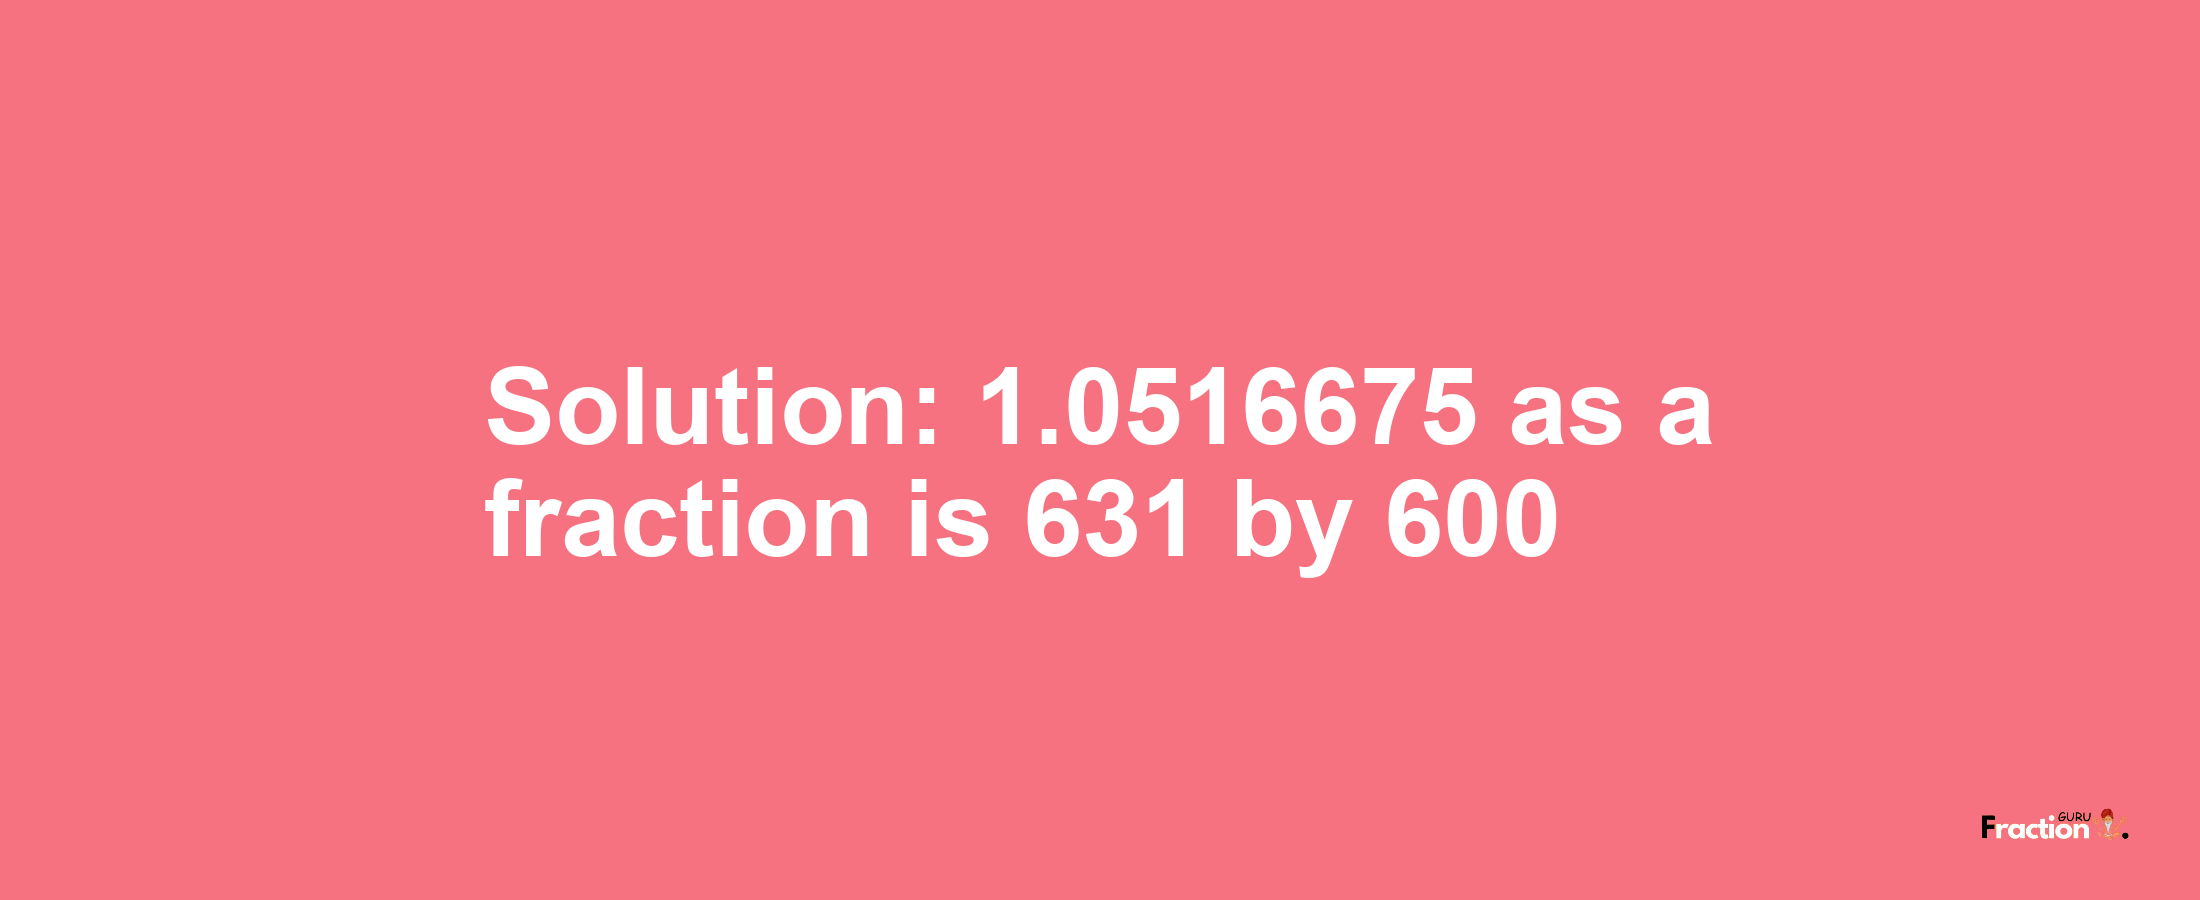 Solution:1.0516675 as a fraction is 631/600